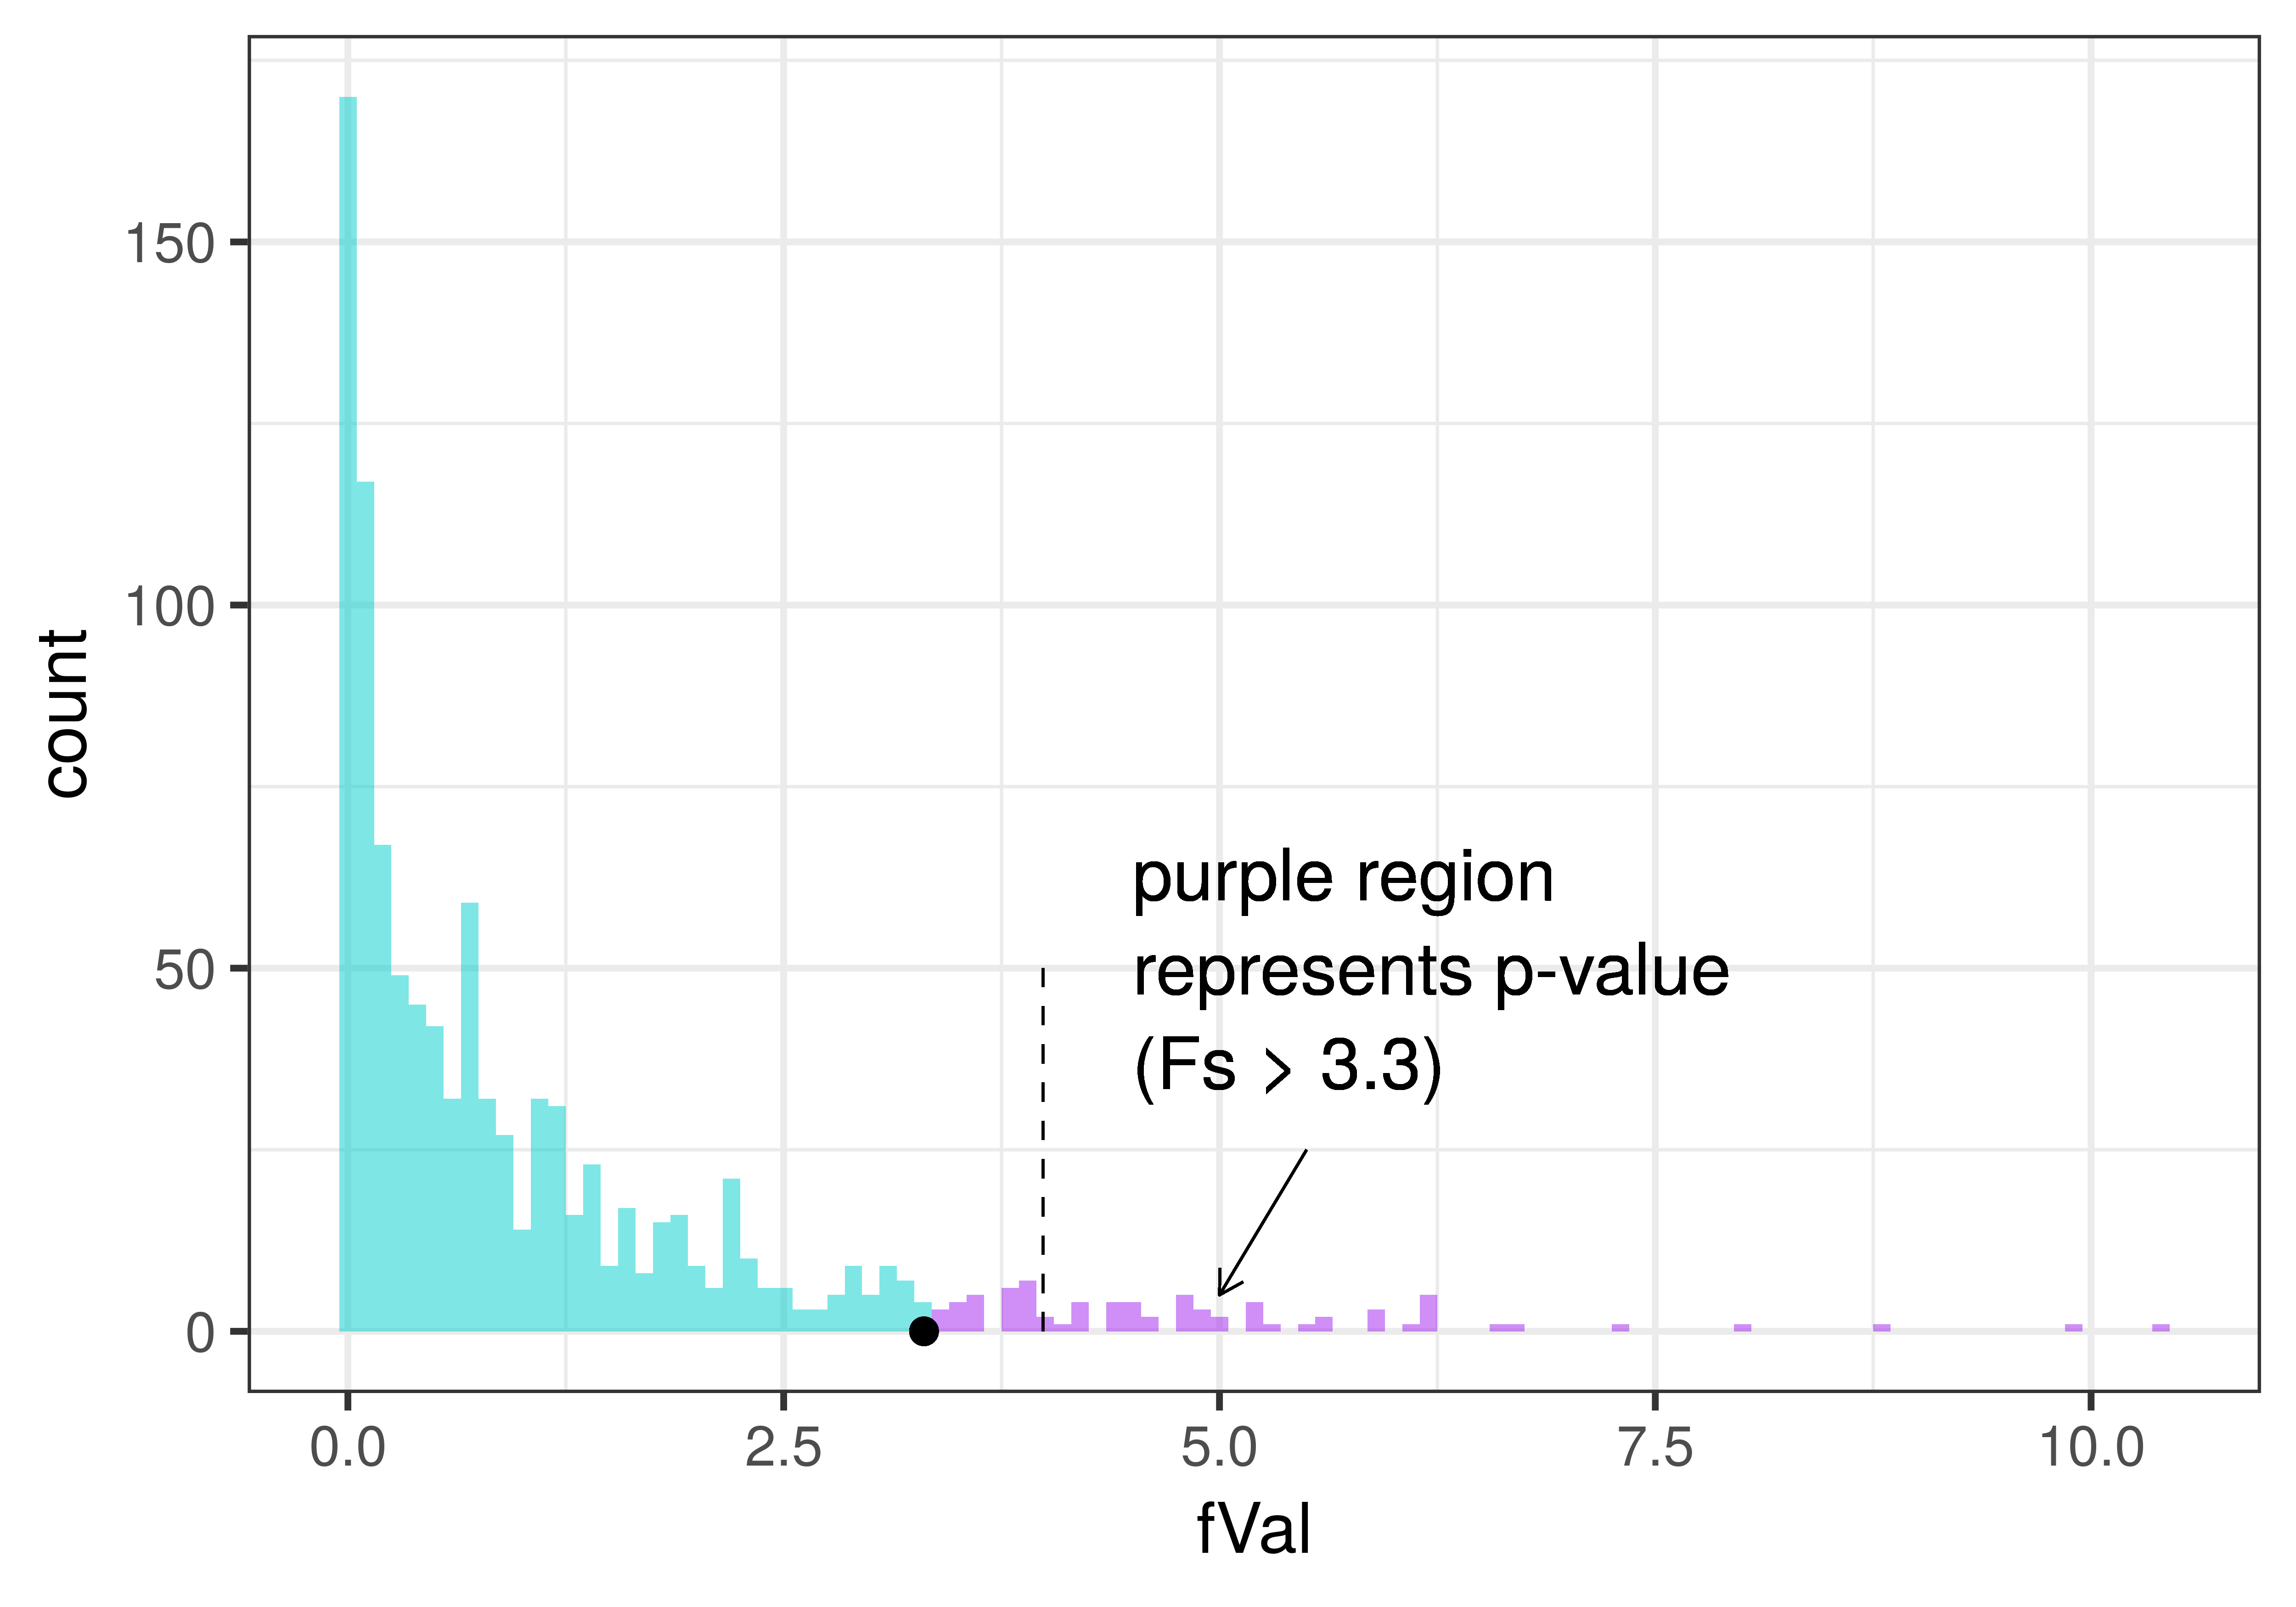 A histogram of the sampling distribution of F. It is skewed right, with most F's between zero and 2.5. and the tail extends from about 2.5 to about 10. The area of the tail that stretches from an F value of 3.3 and above has been shaded in purple and labeled as the region that represents p-value, or all the F's greater than 3.3. The sample F value of 3.3 has also been marked as a dot on the x-axis and falls right on the border of the purple region.